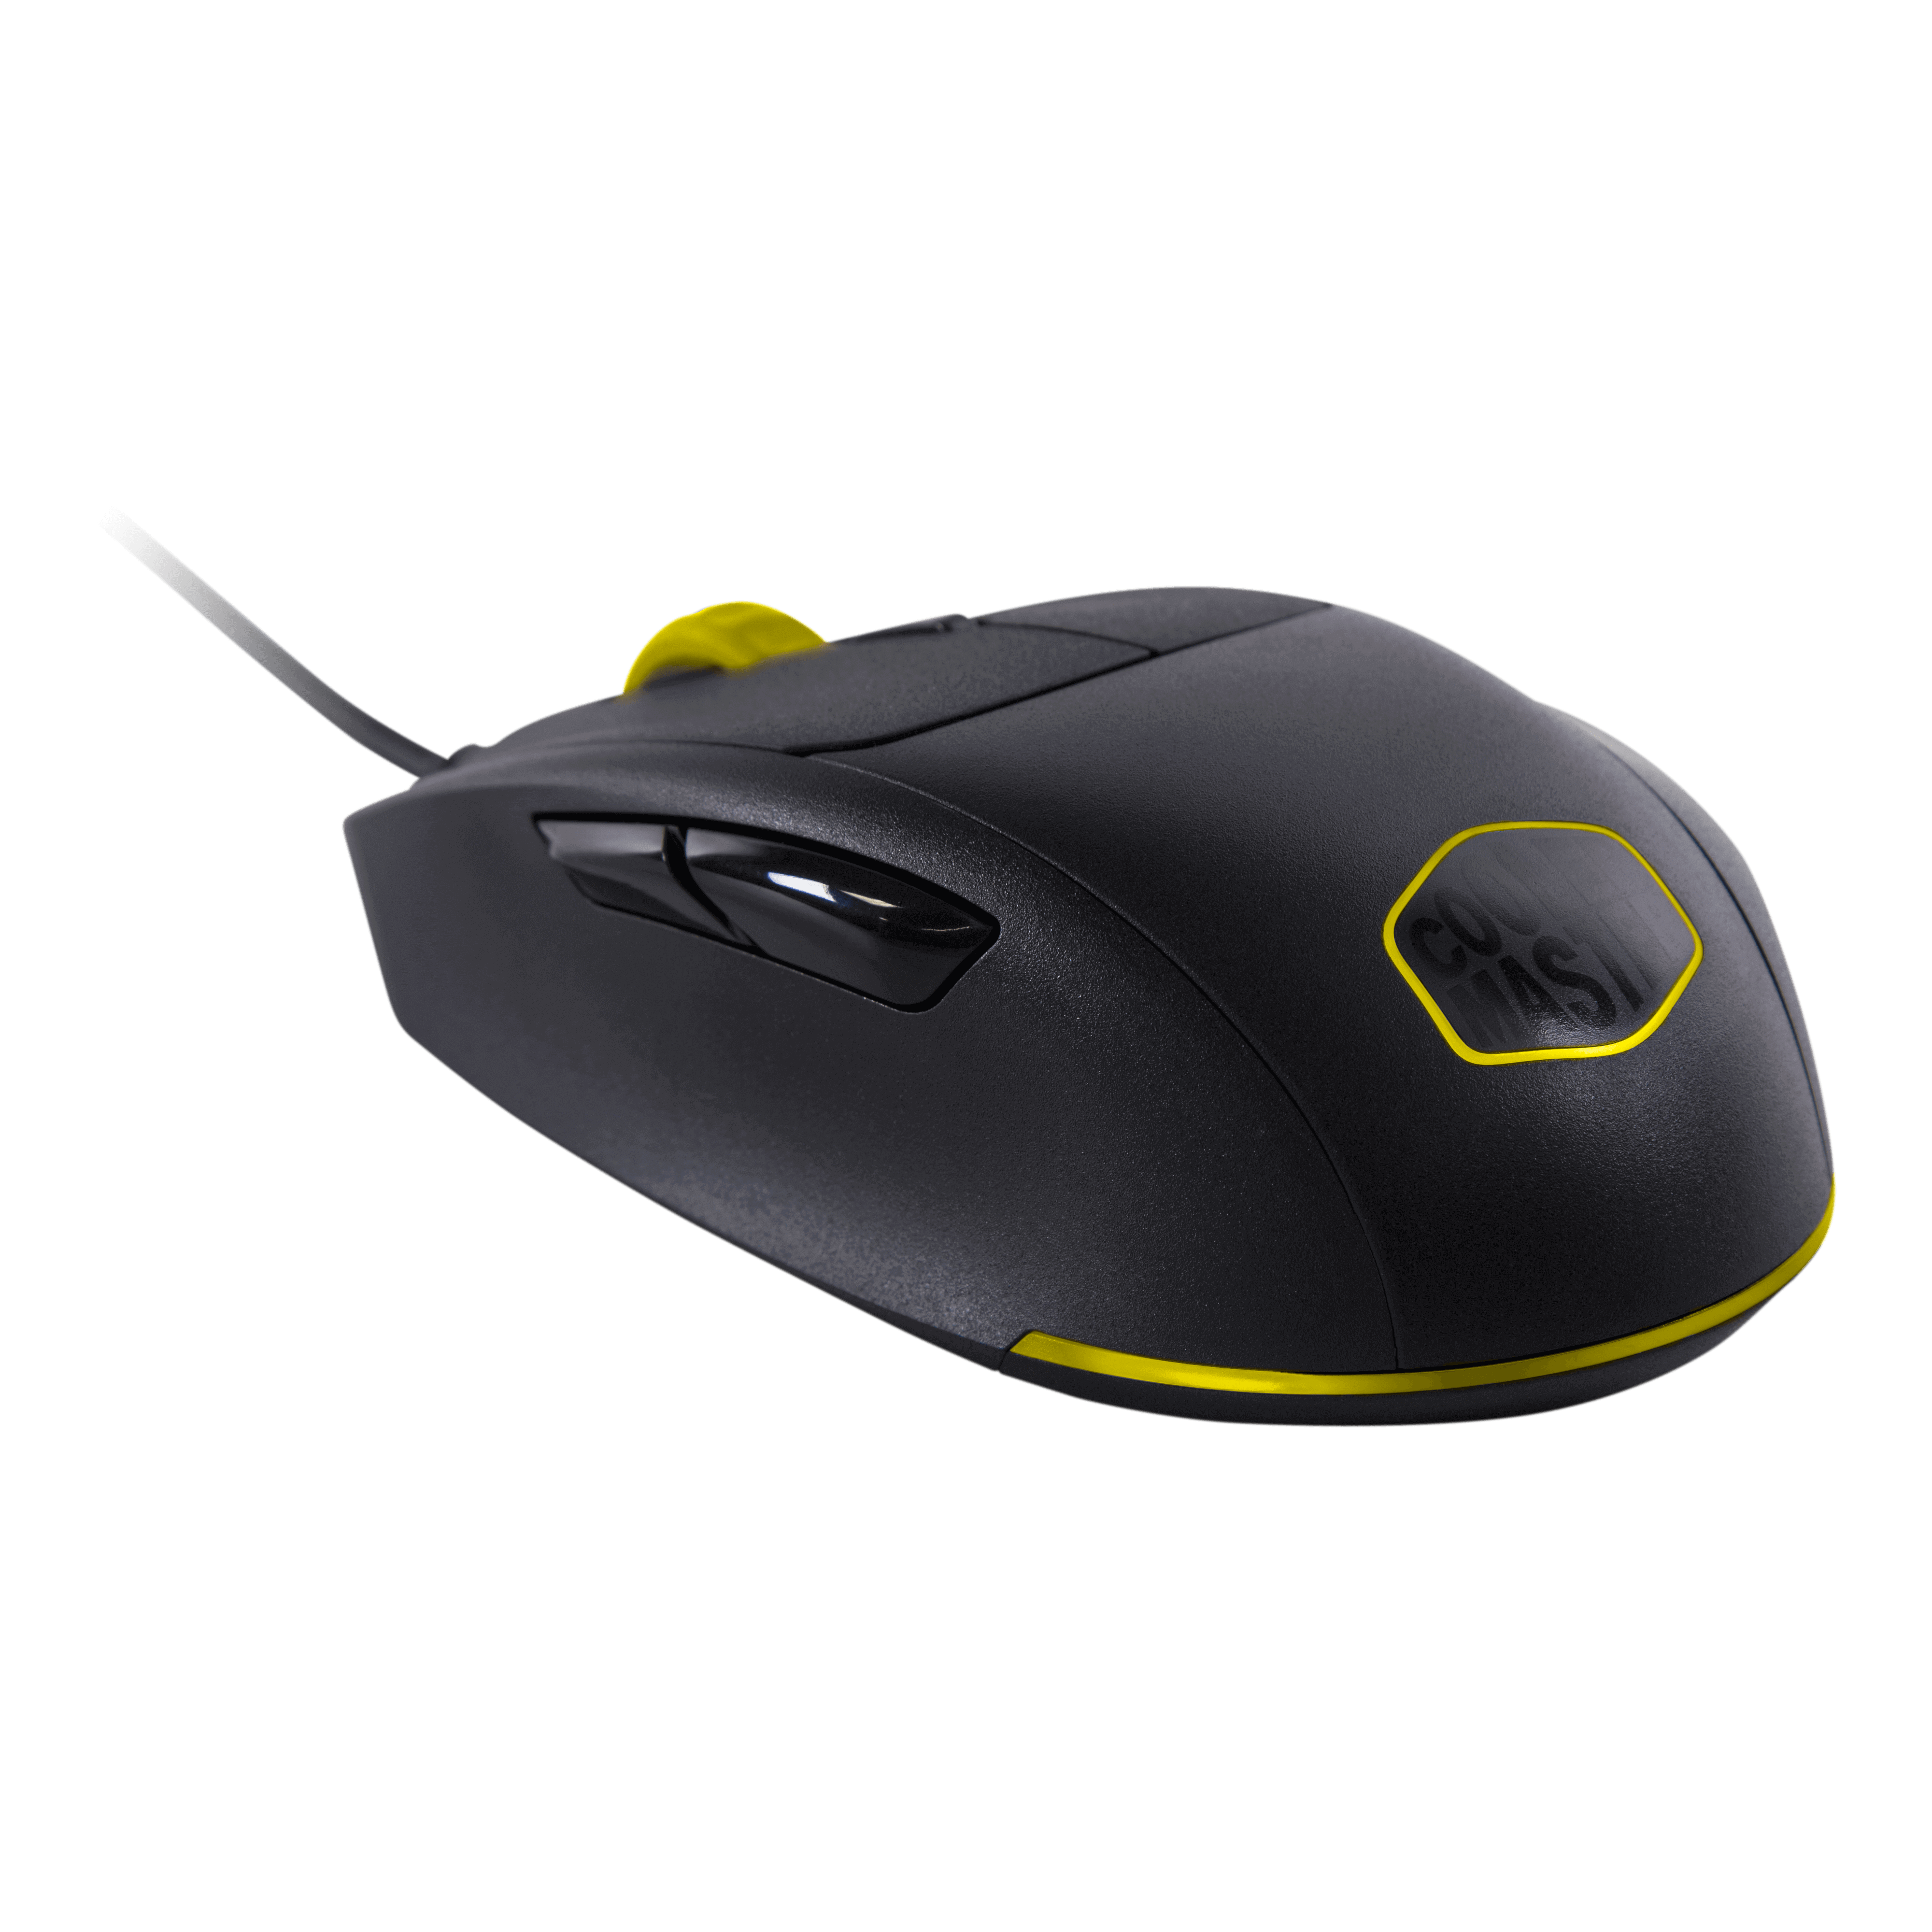 MasterMouse MM520 | Cooler Master USA